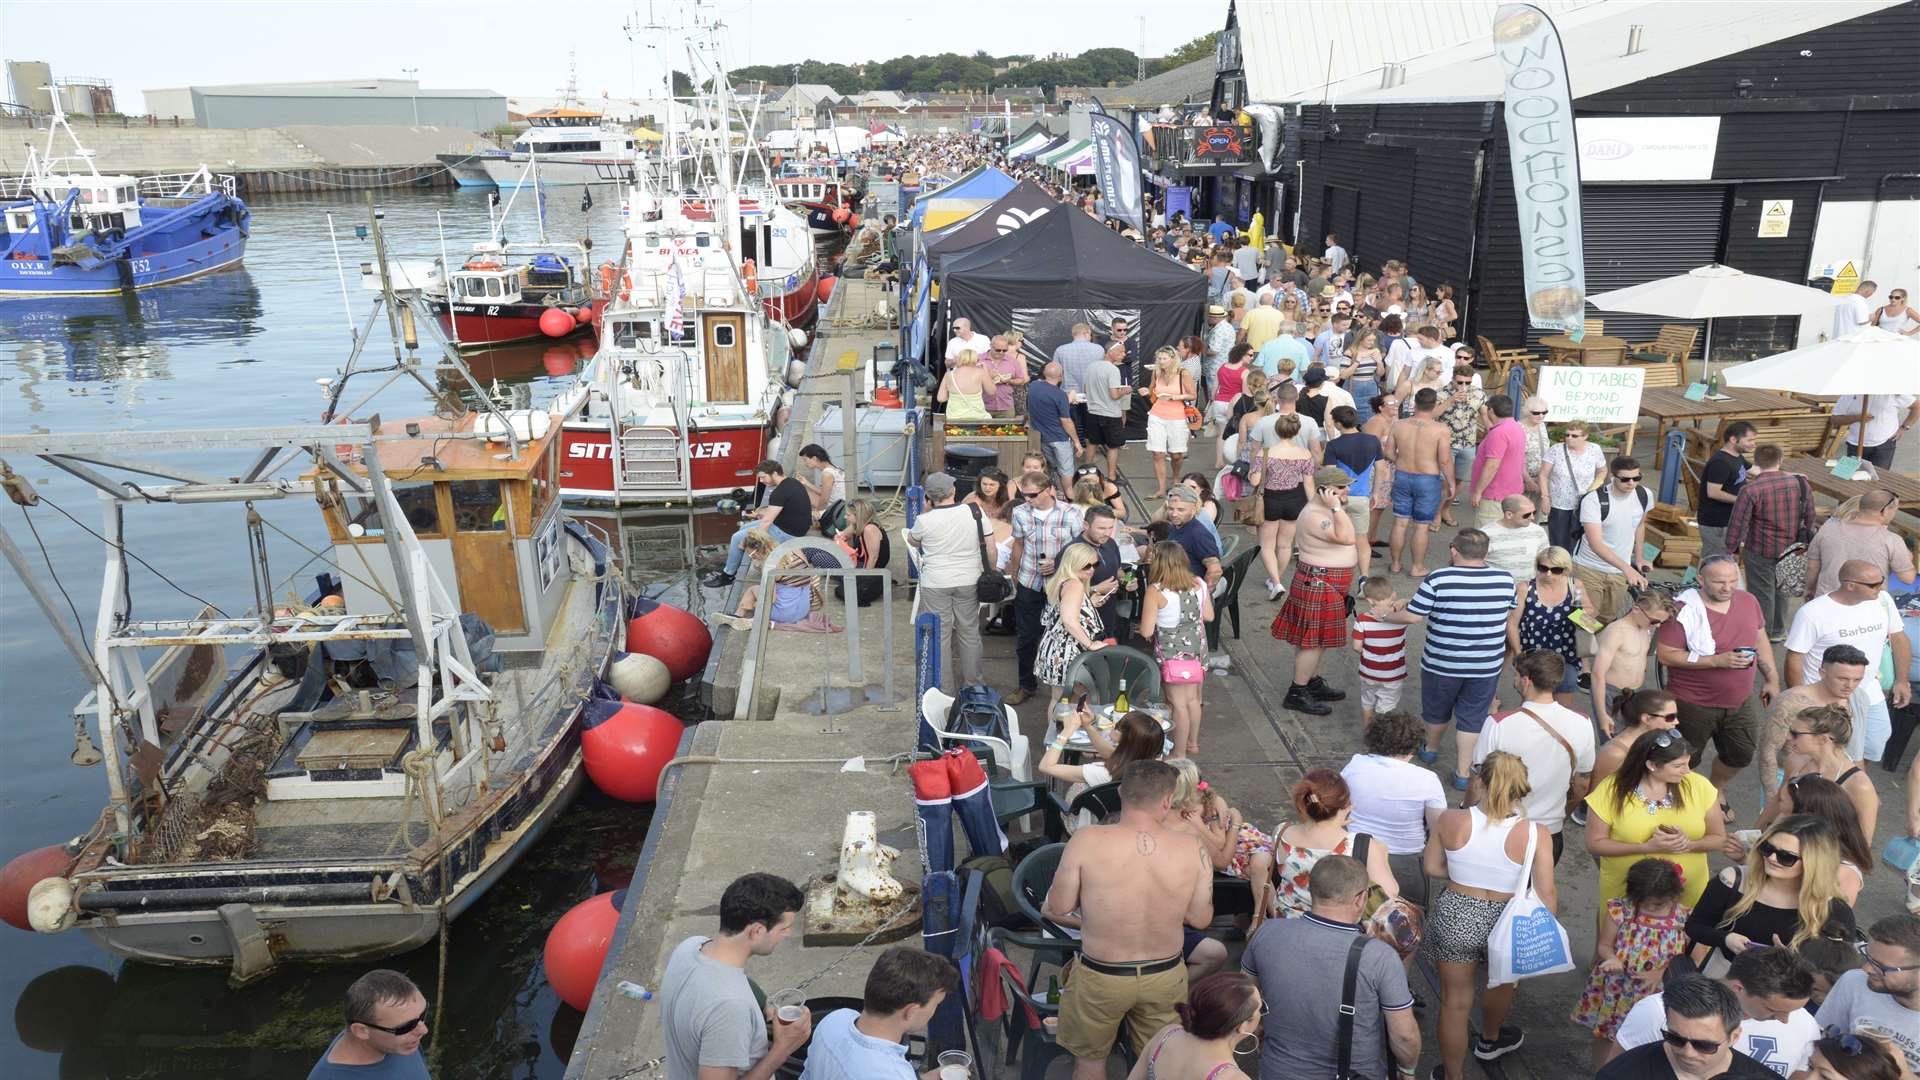 There were complaints last year's Whitstable Oyster Festival was too crowded